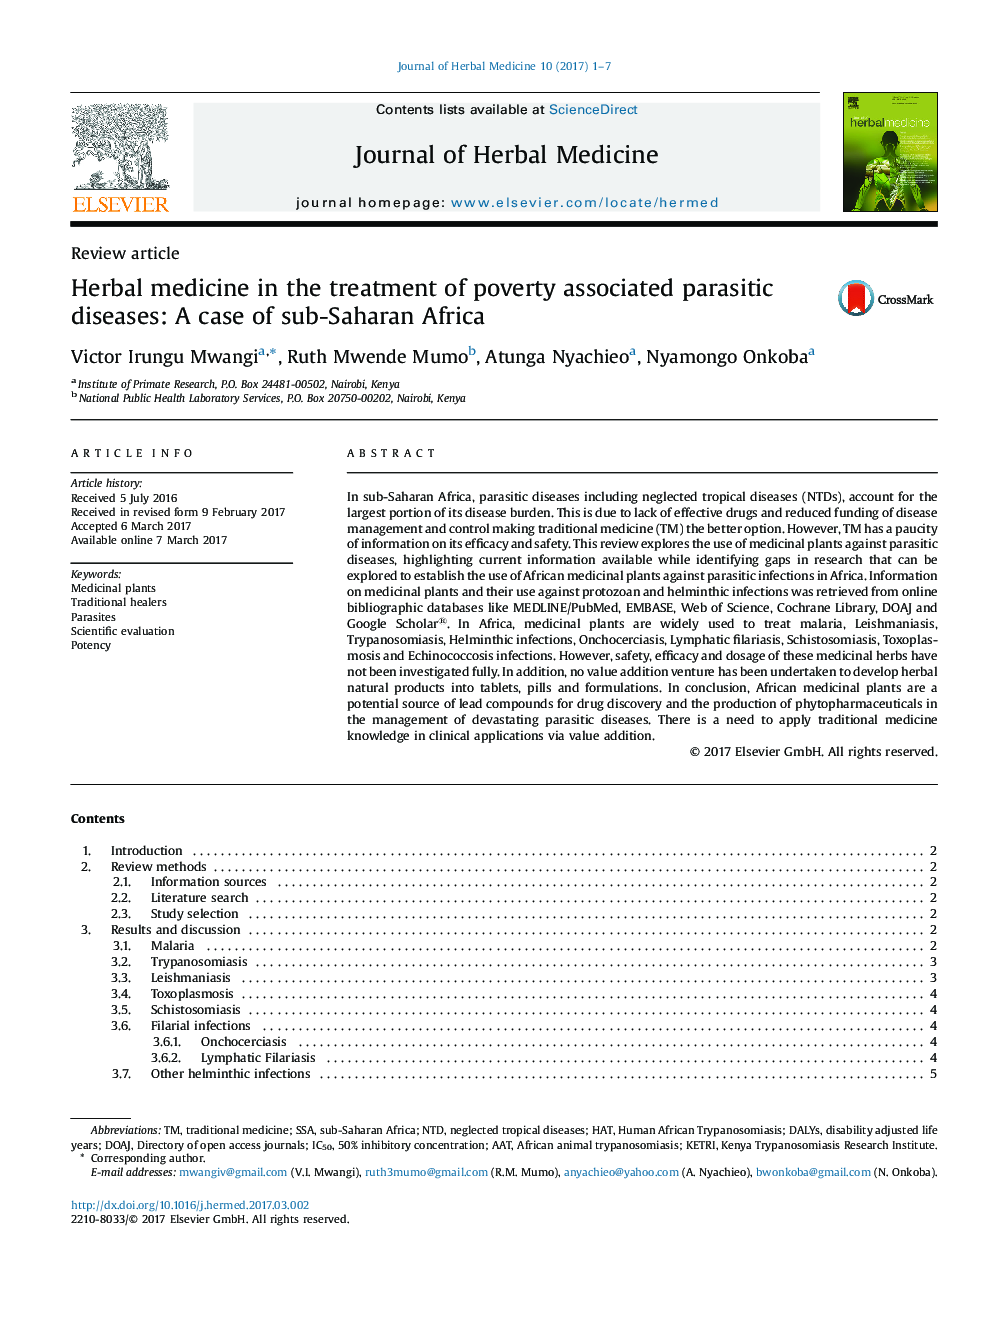 Herbal medicine in the treatment of poverty associated parasitic diseases: A case of sub-Saharan Africa